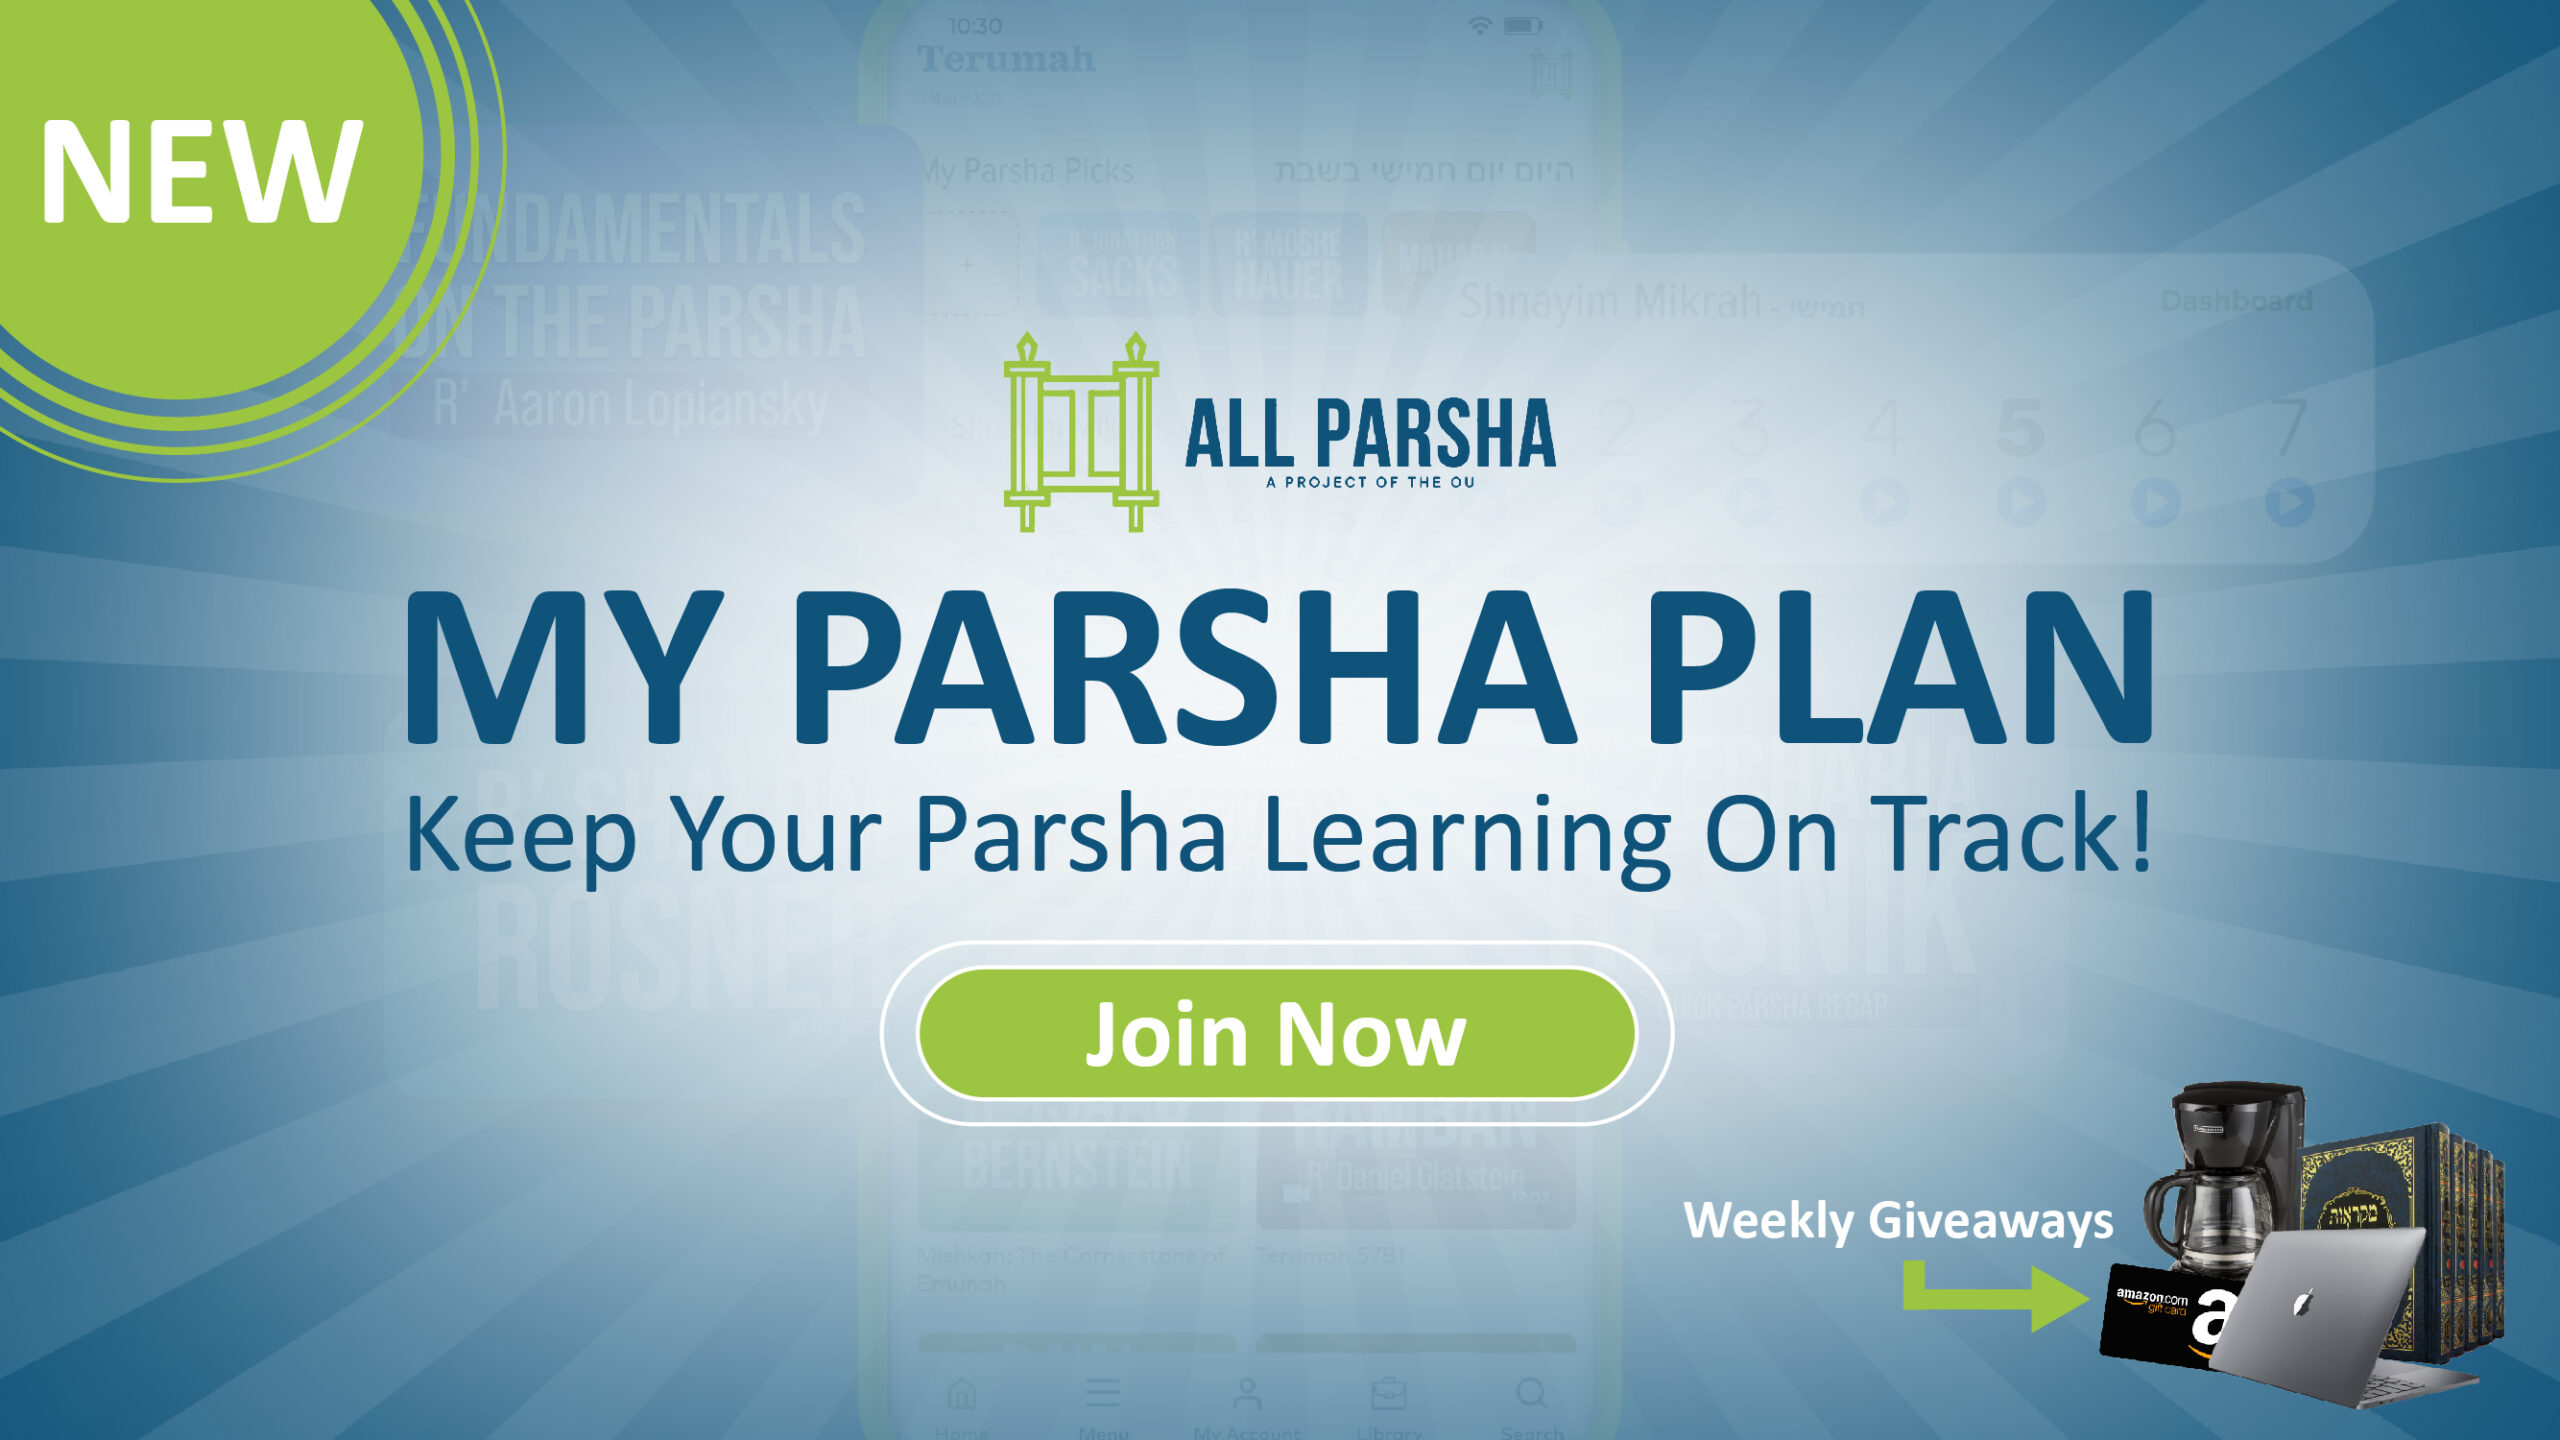 Join MY PARSHA PLAN by All Parsha